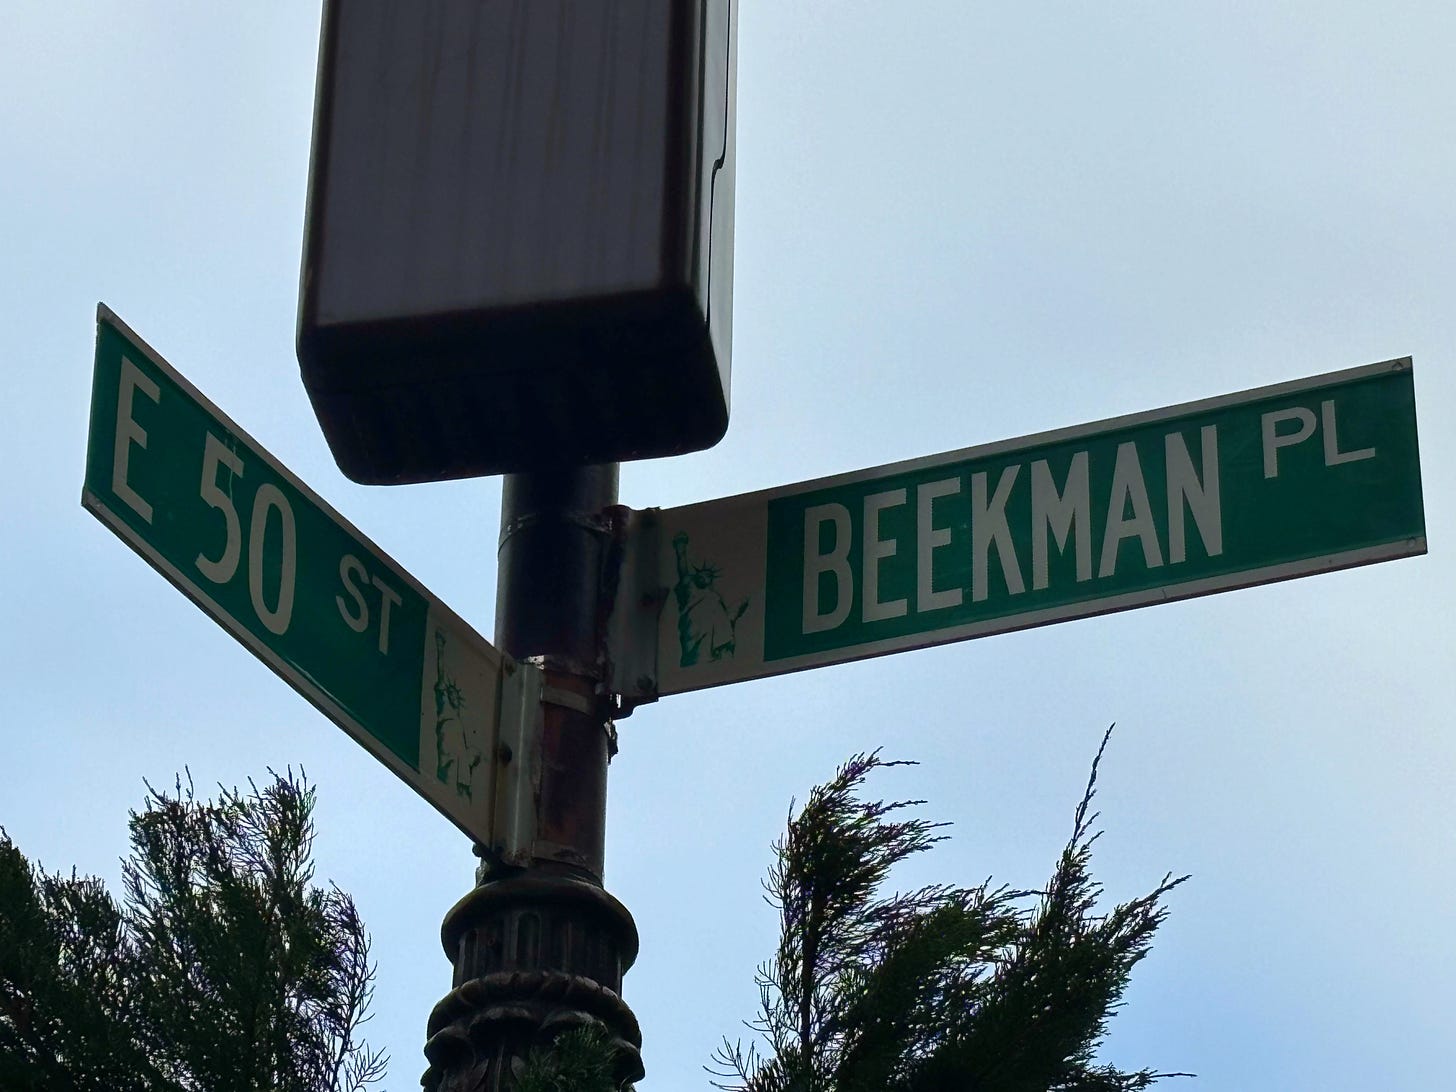 The street sign where Mount Pleasant stood, now East 50th and Beekman Place.